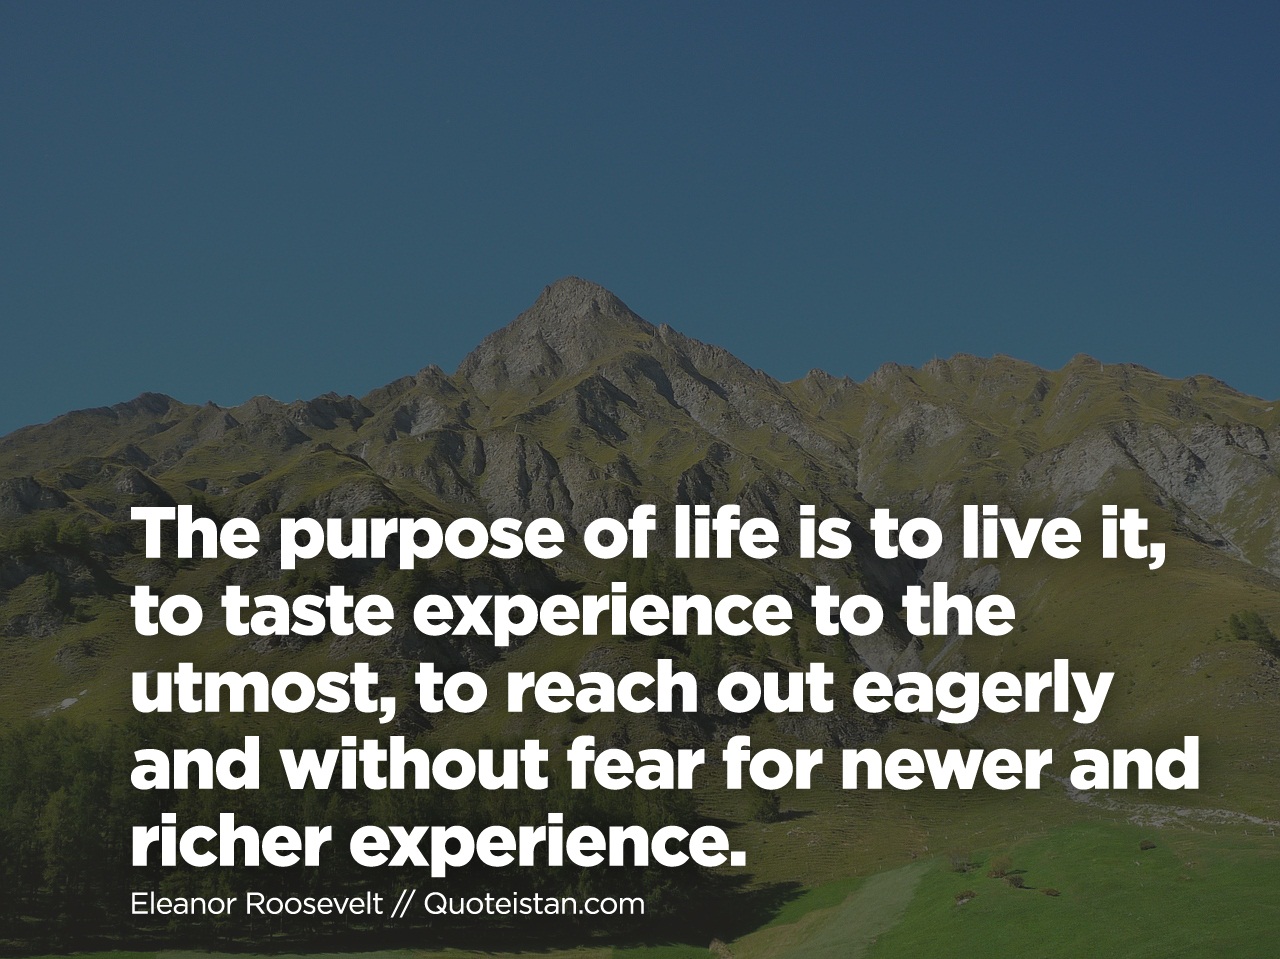 The purpose of life is to live it to taste experience to the utmost